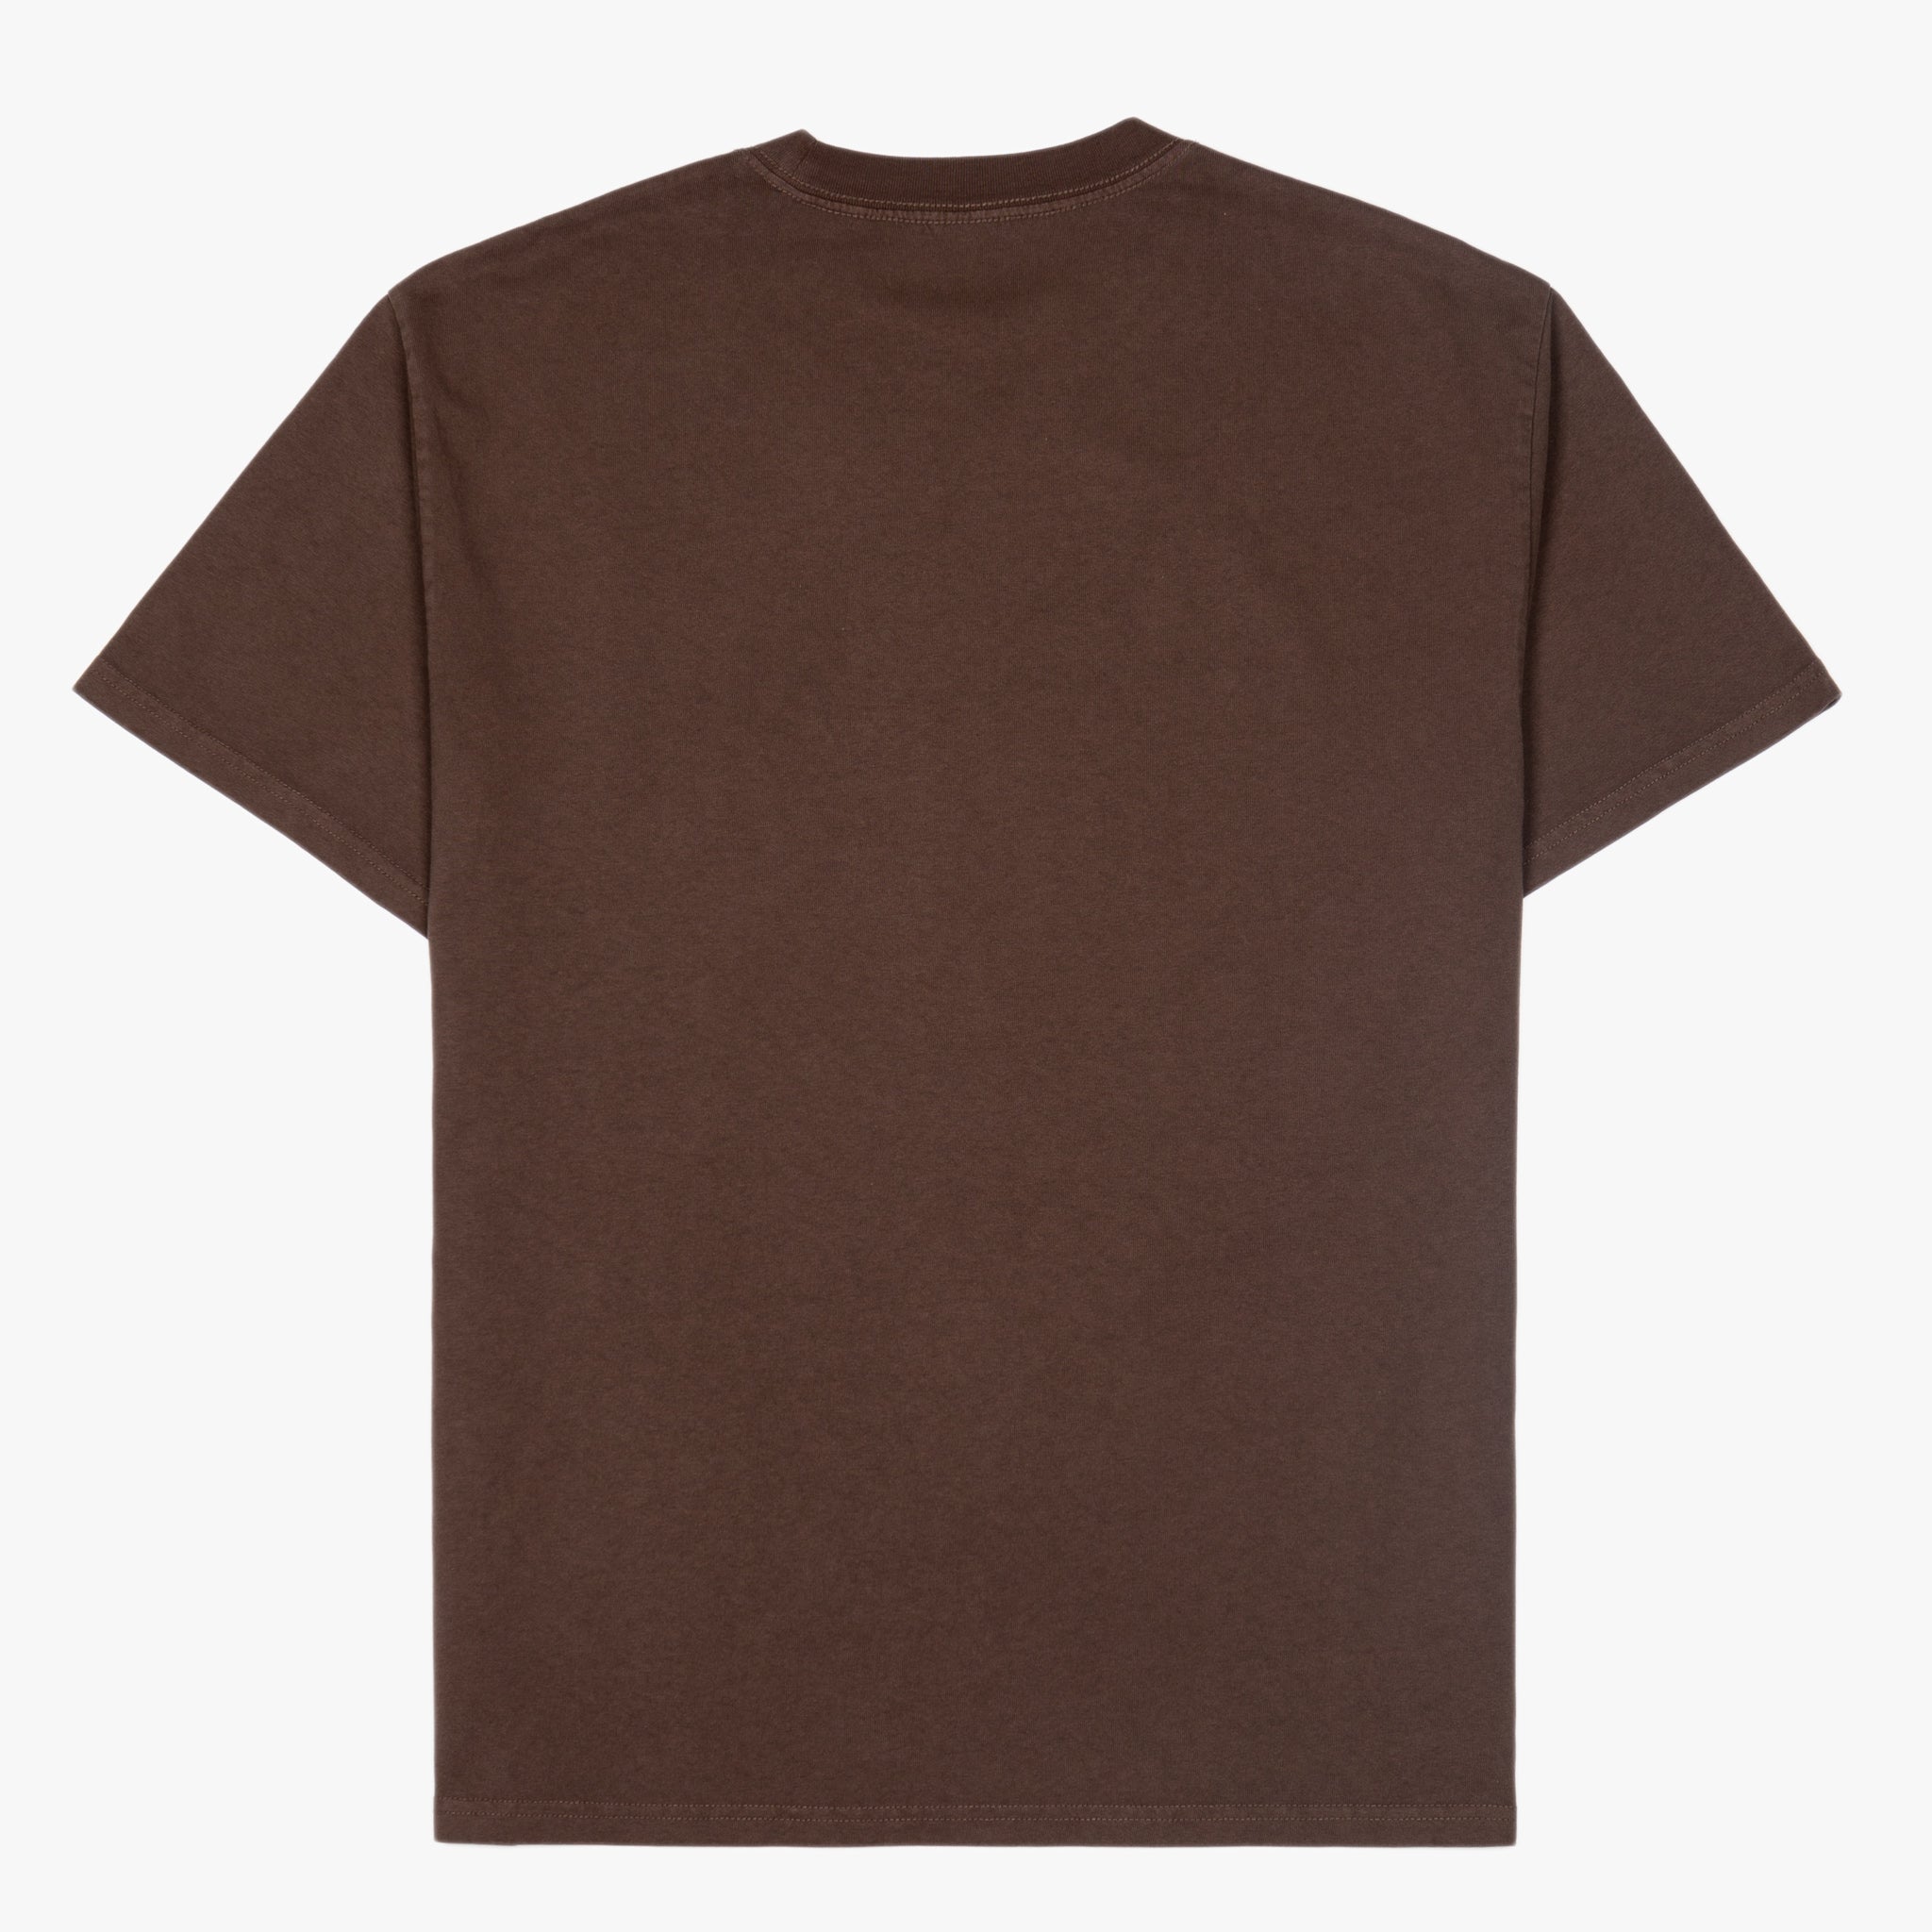 Sigmund Outline Tee (Faded Tobacco)